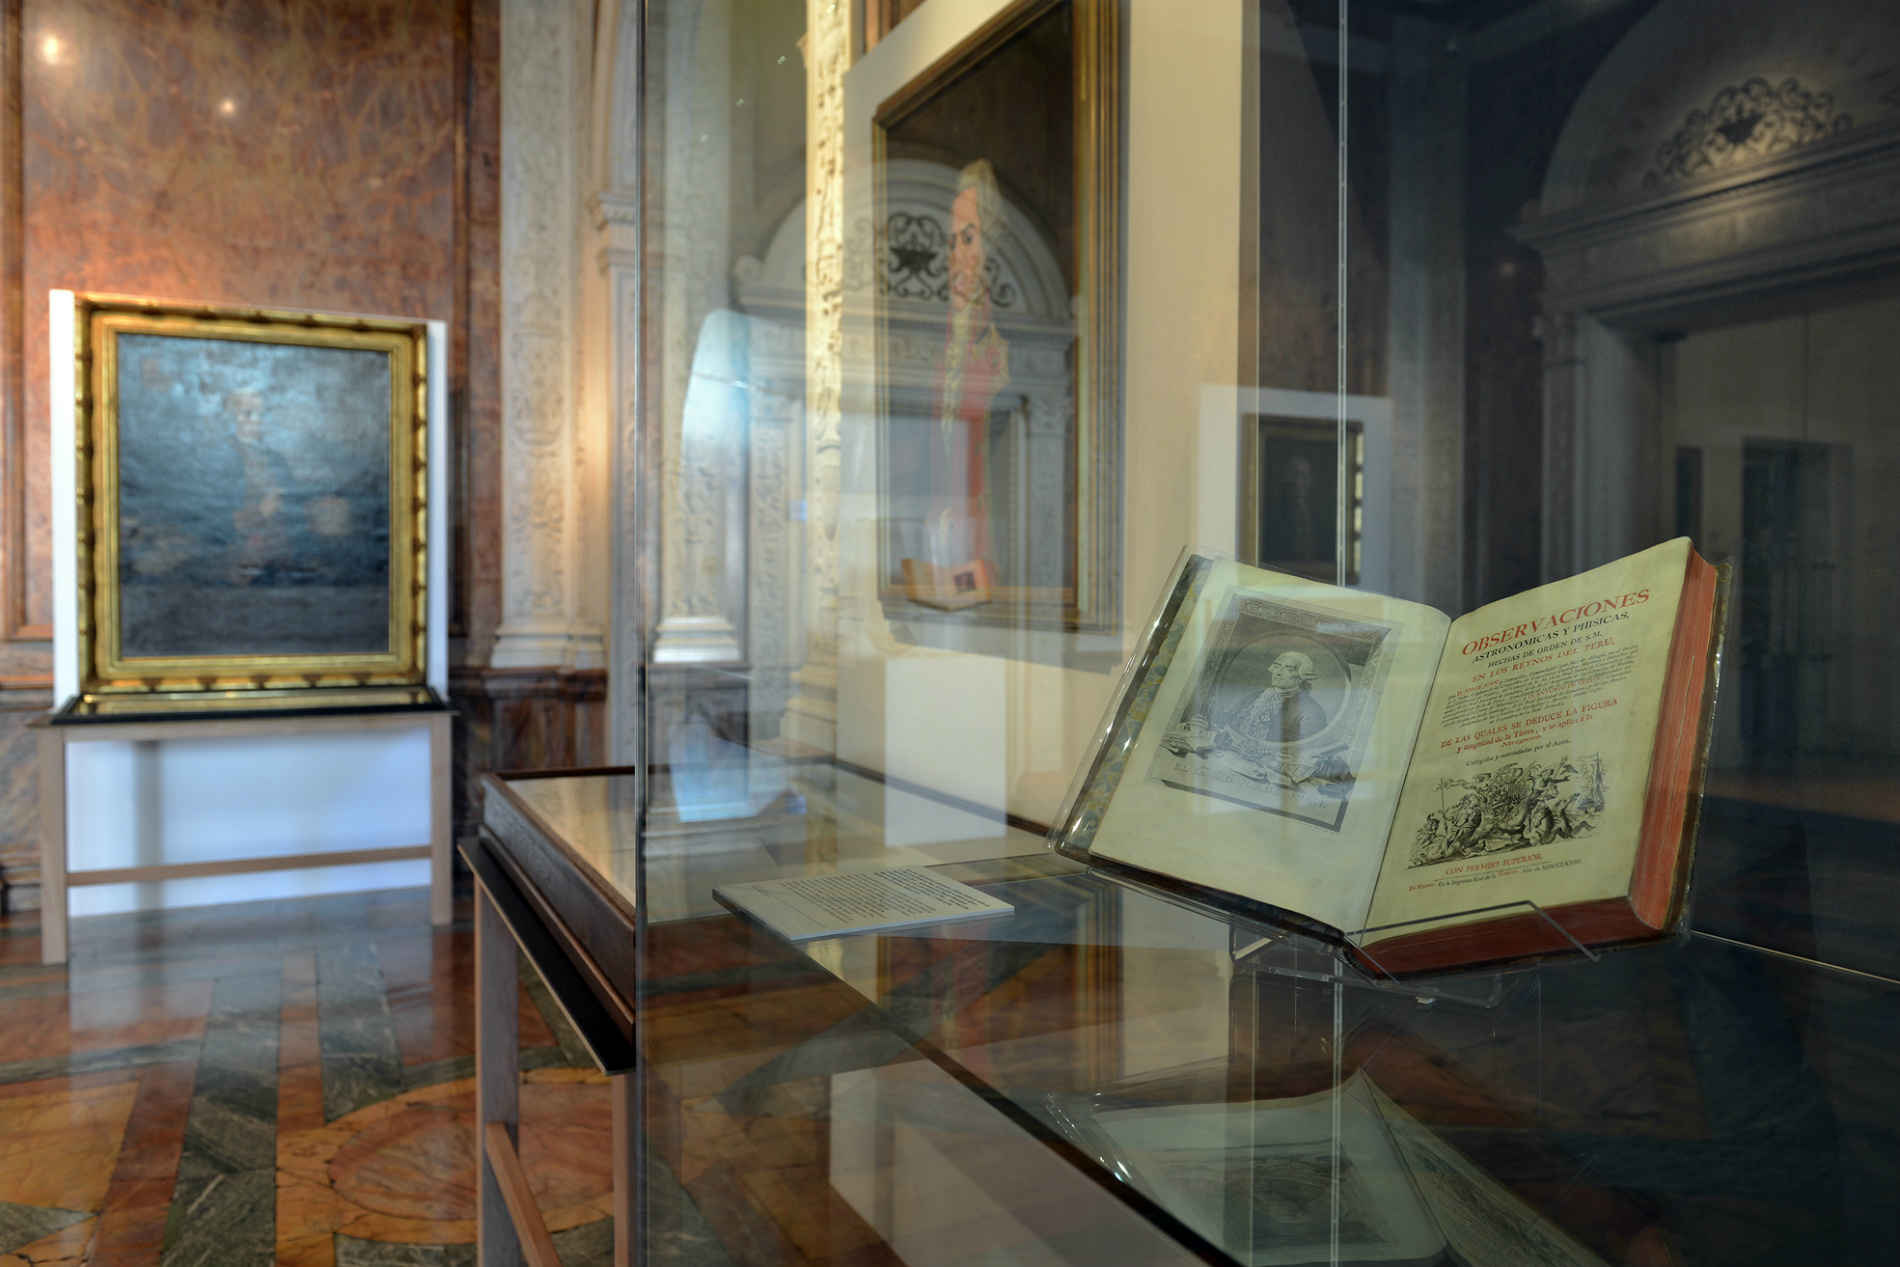 Exhibition “Transactions. Spain in the History of the Royal Society”